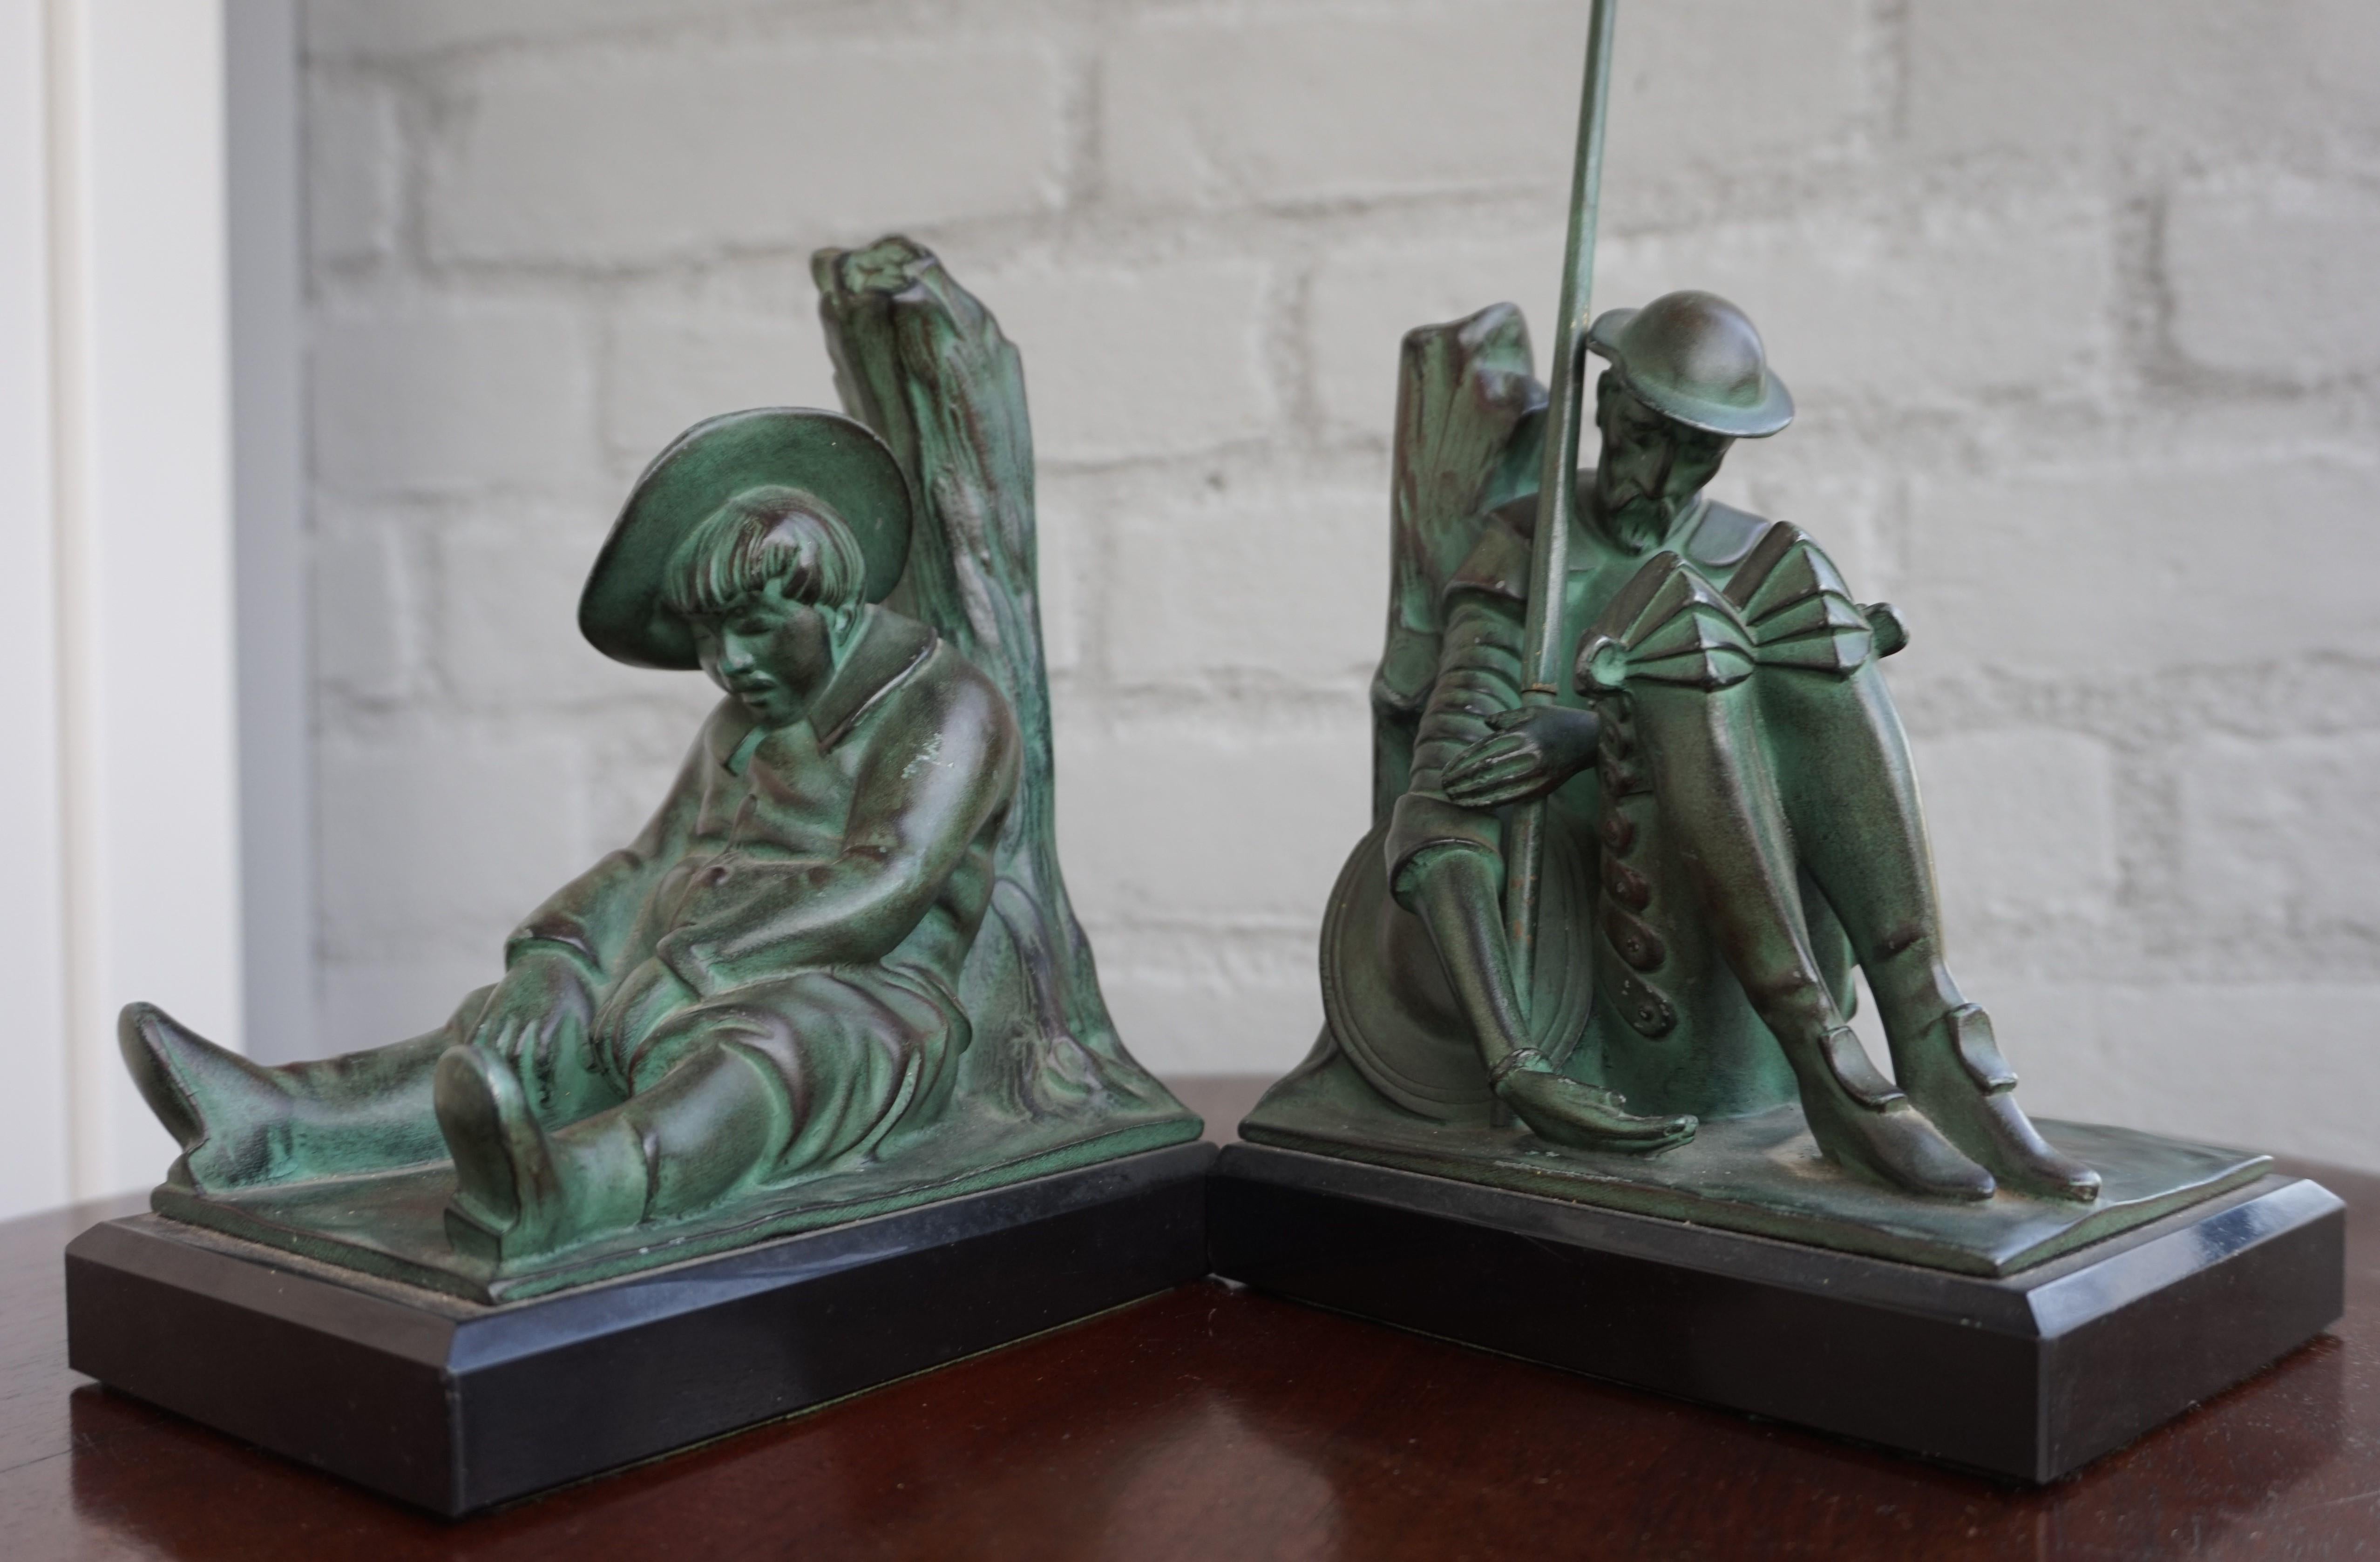 Designed by Janle and handcrafted at the Max Le Verrier foundry in France.

If you are looking for a stylish, top quality made and practical pair of bookends then these rare ones could be perfect for you. The taller and slimmer figure obviously is